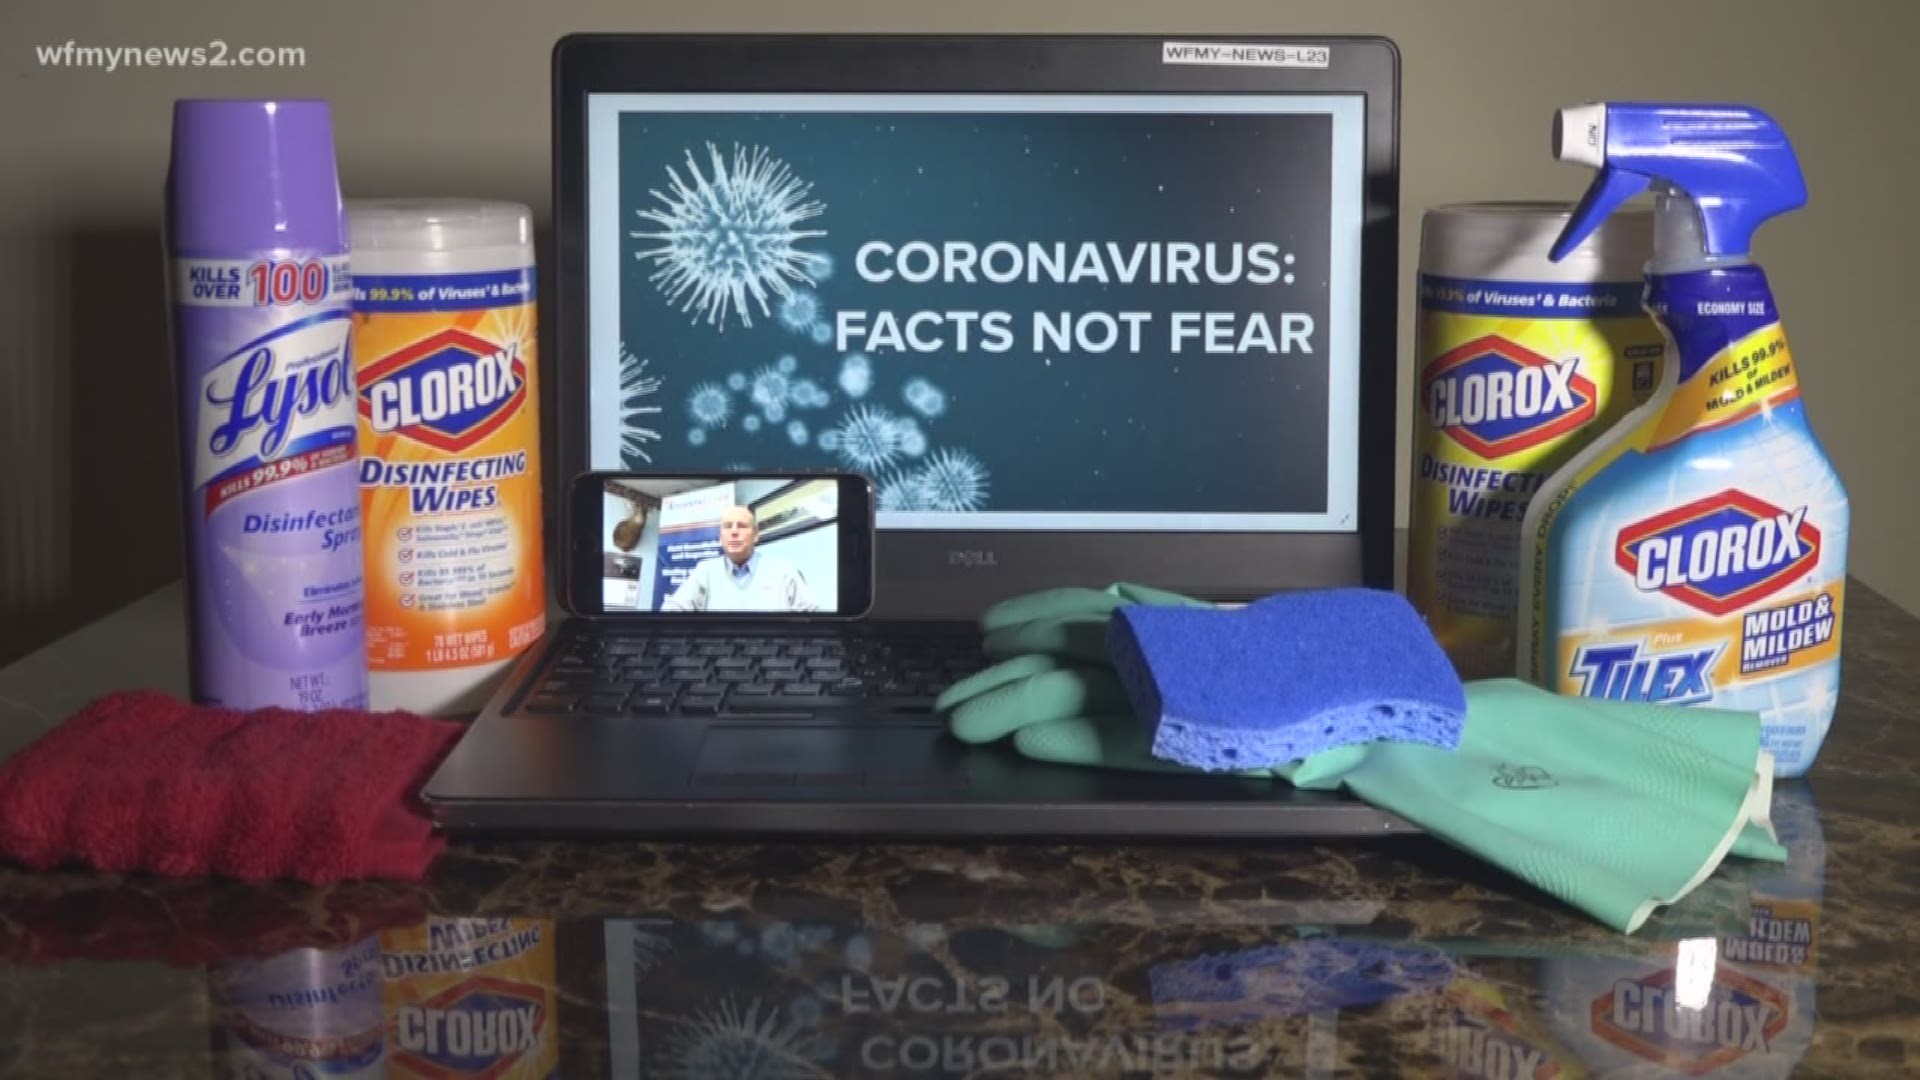 Health officials say you should clean and disinfect frequently touched surfaces daily.